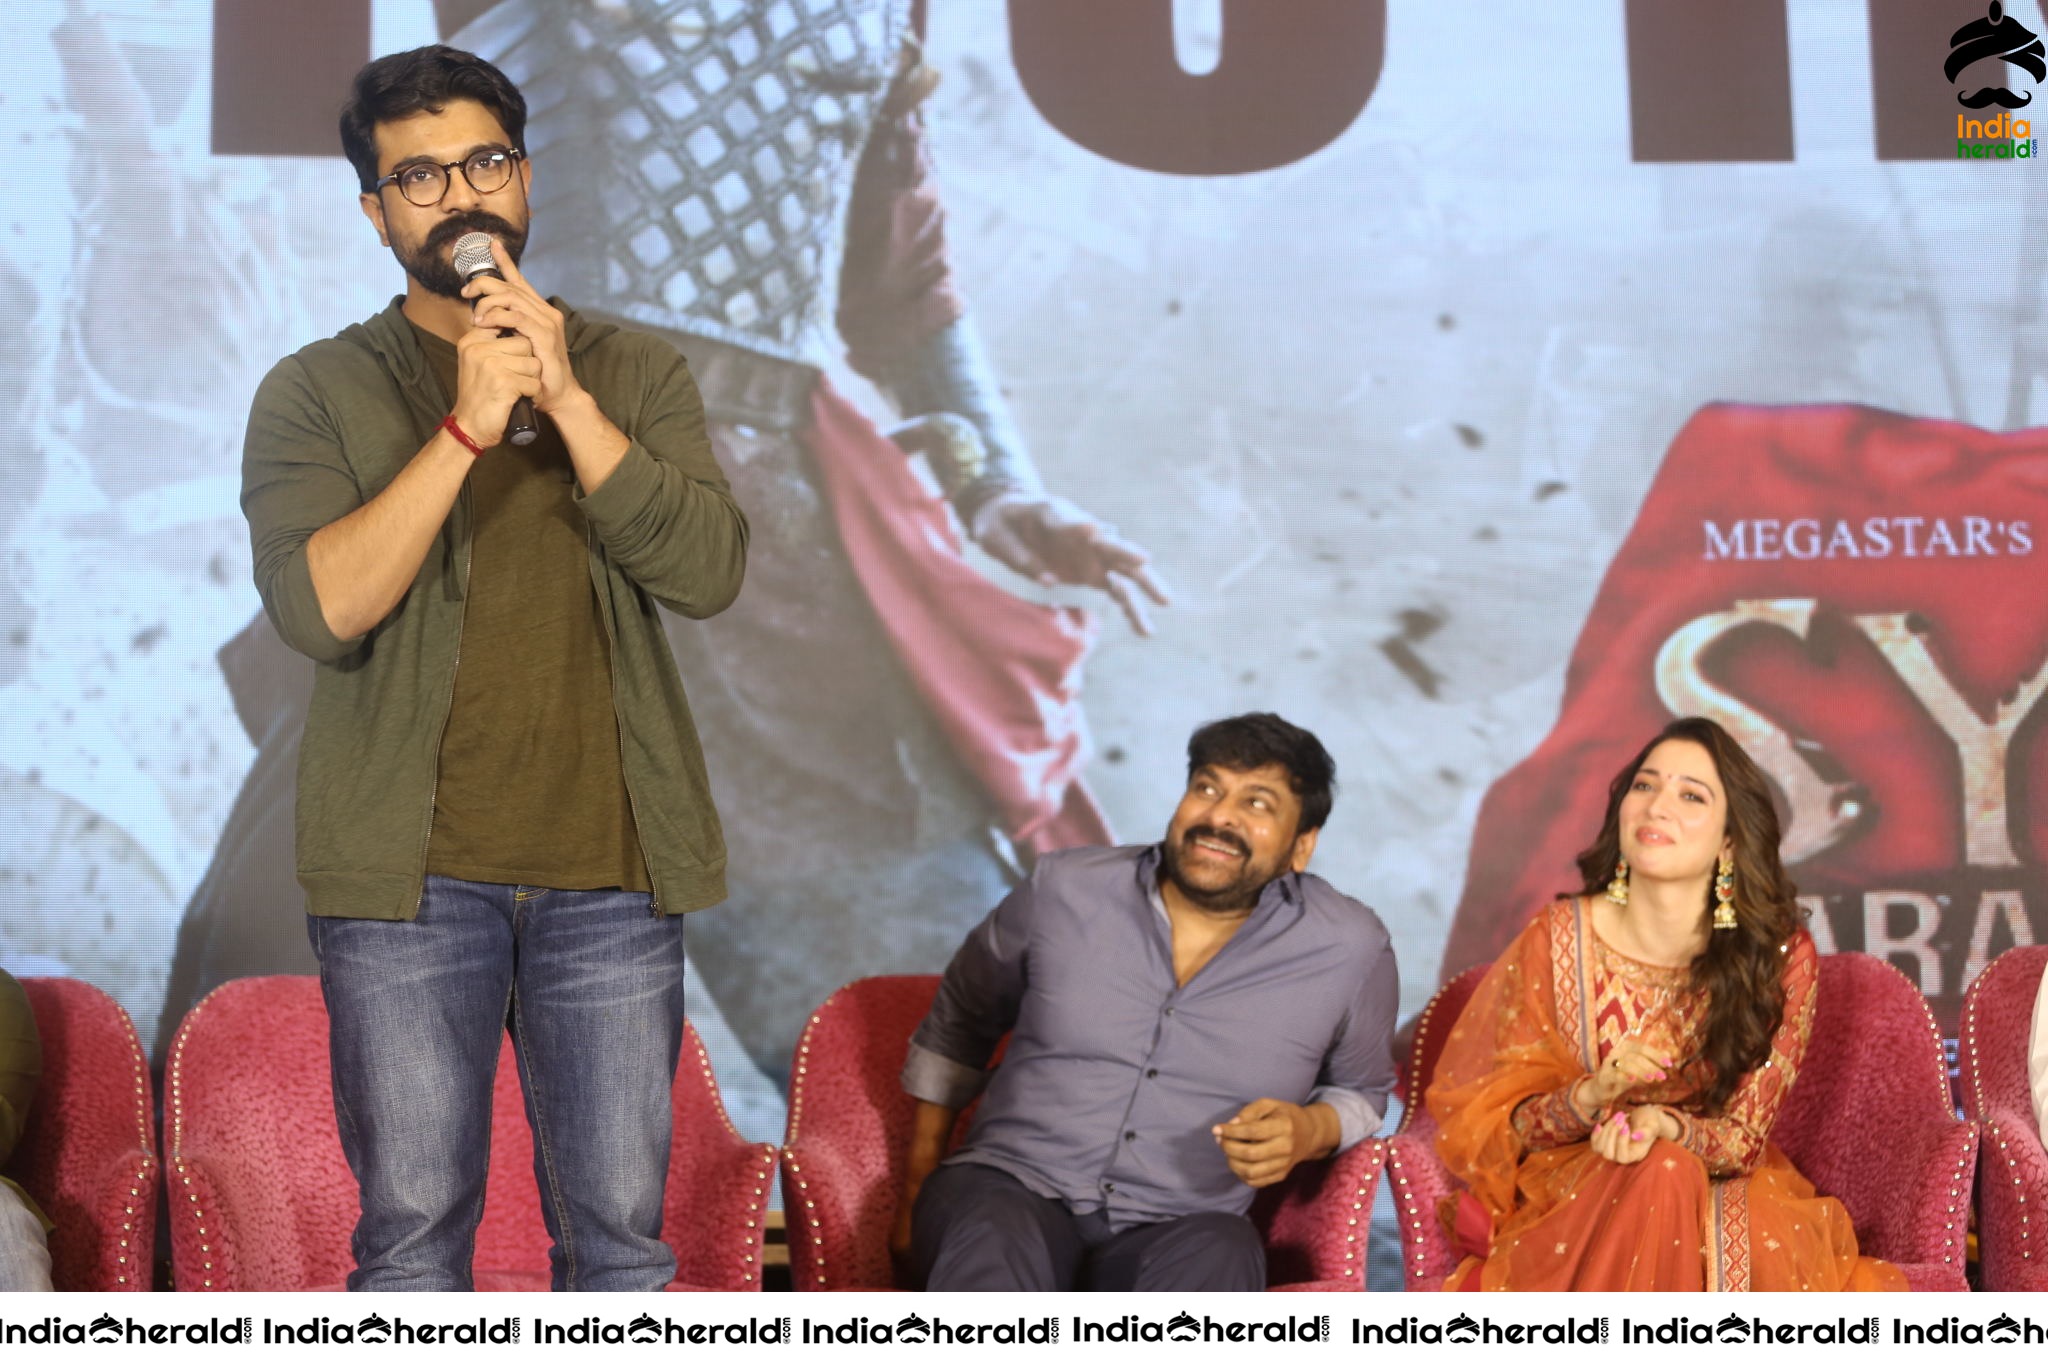 Chiranjeevi Tamanna and Ram Charan from the stage of Sye Raa Thank You Meet Set 2